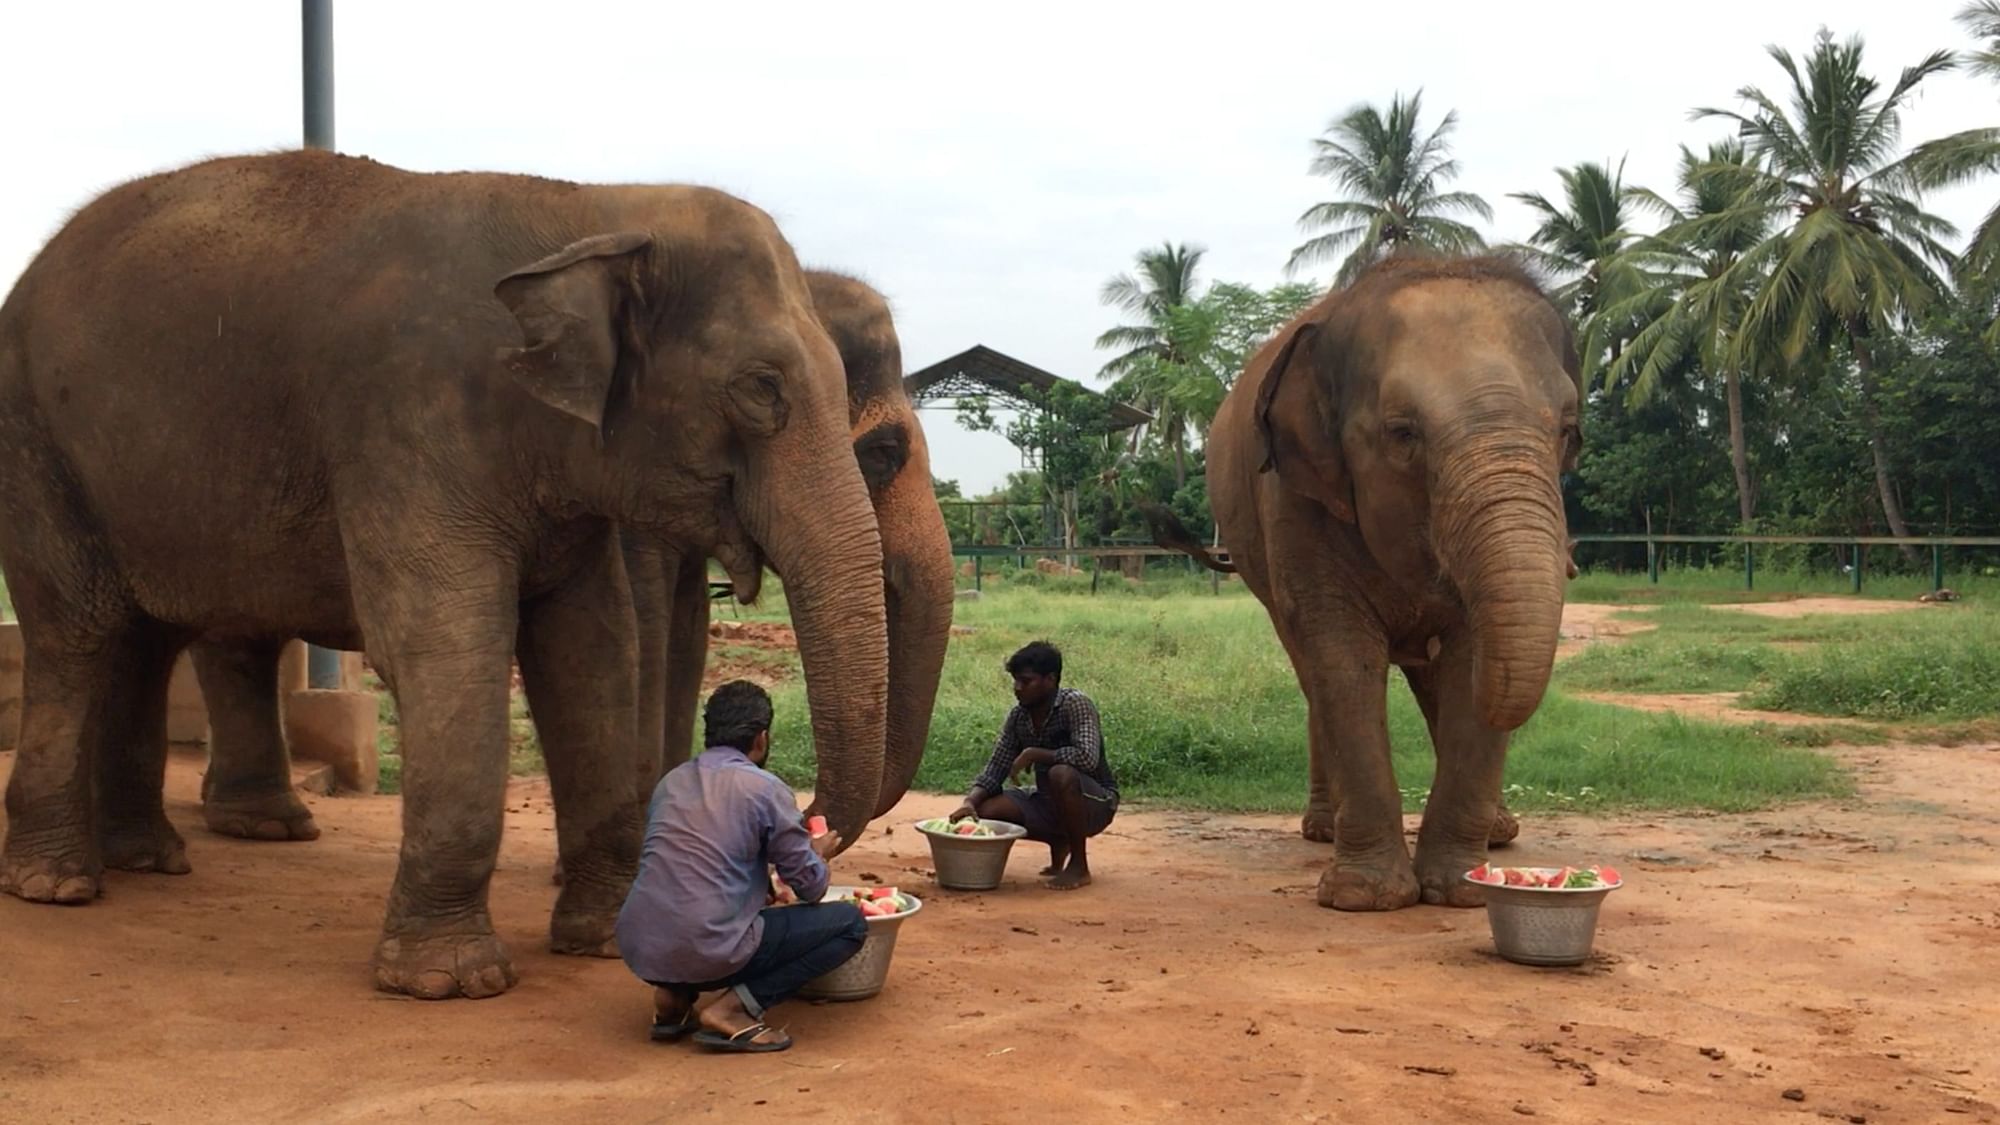 The three elephants were living a happy life in a chain-free facility in Marakkanam. However, following a court order, the forest officials have taken them away using brute force. Picture taken on 18 September 2019.